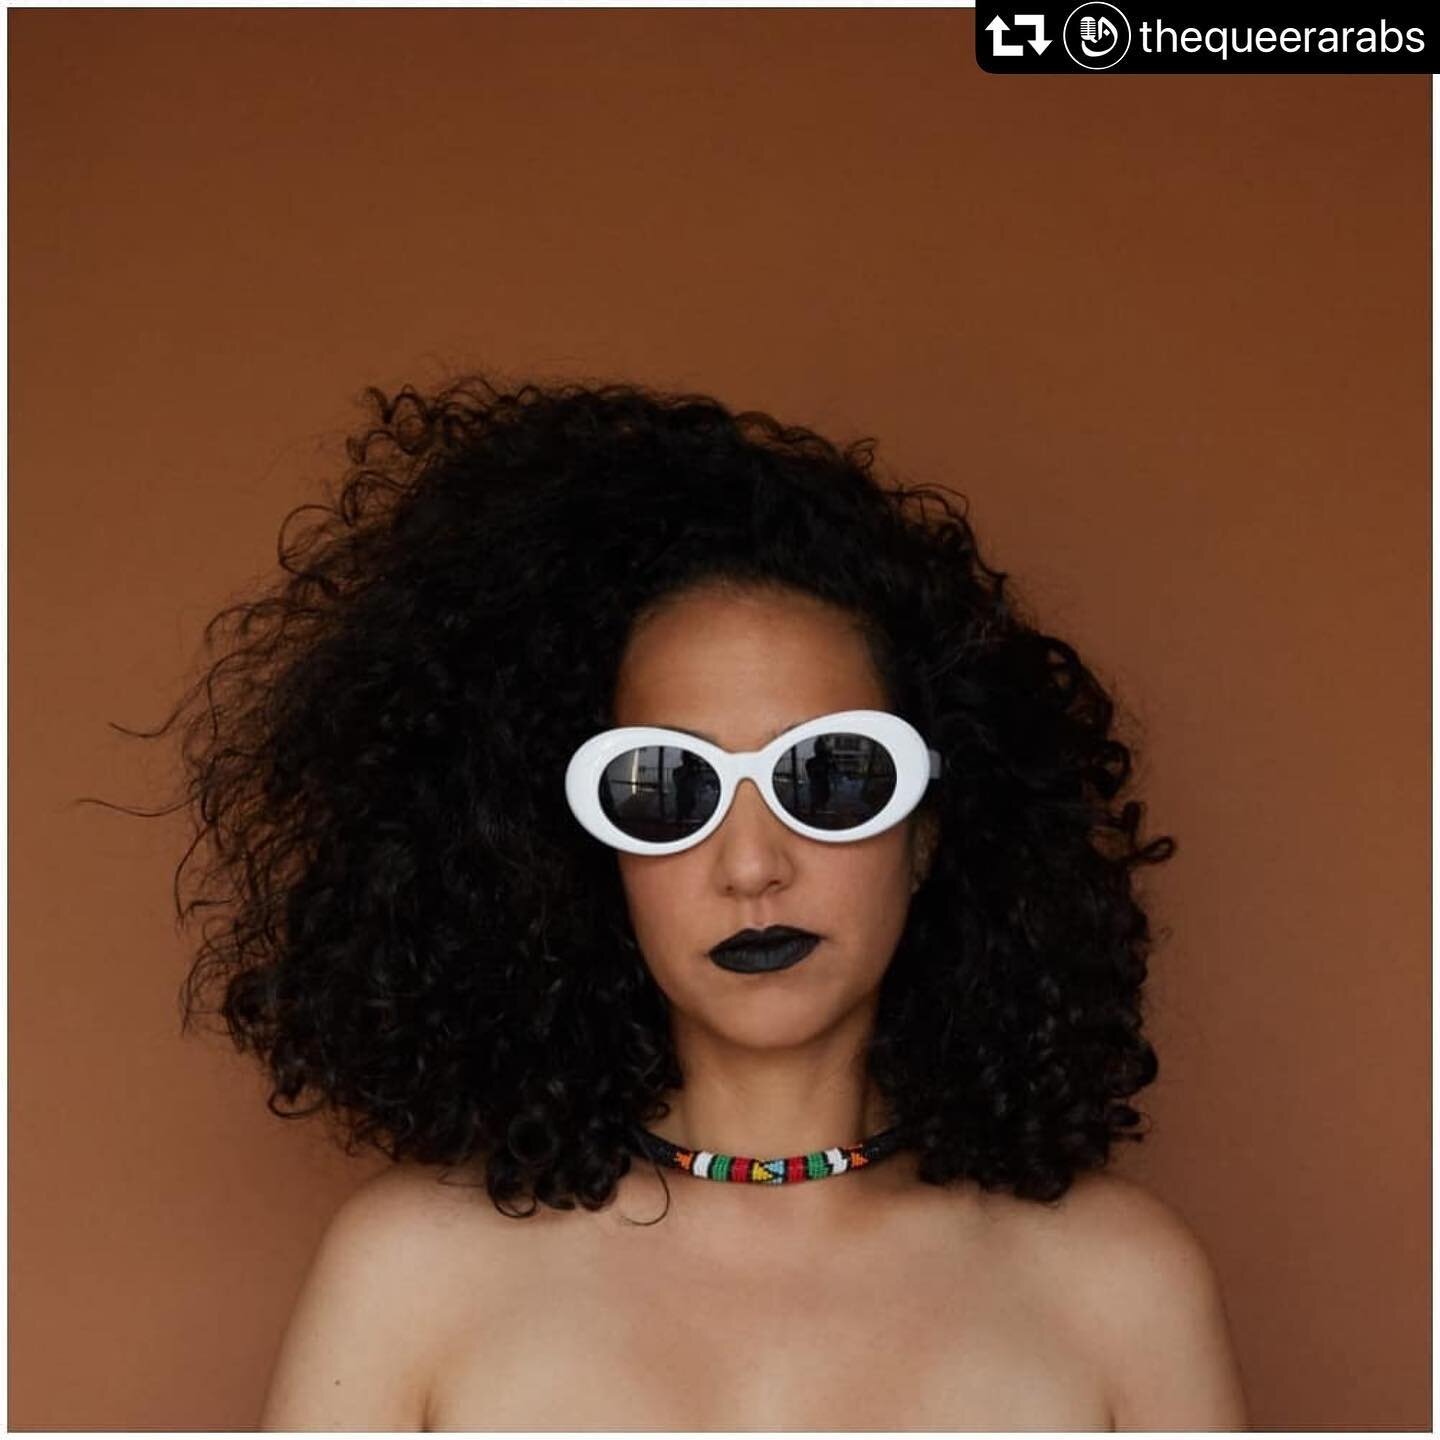 #repost @thequeerarabs
・・・
Episode 151 [in English]:

@lastmangoinparis is a producer, singer-songwriter, and multi-instrumentalist, newly based in Toronto, with East African and South Asian roots. Their recent album &ldquo;Just Before the World Ends